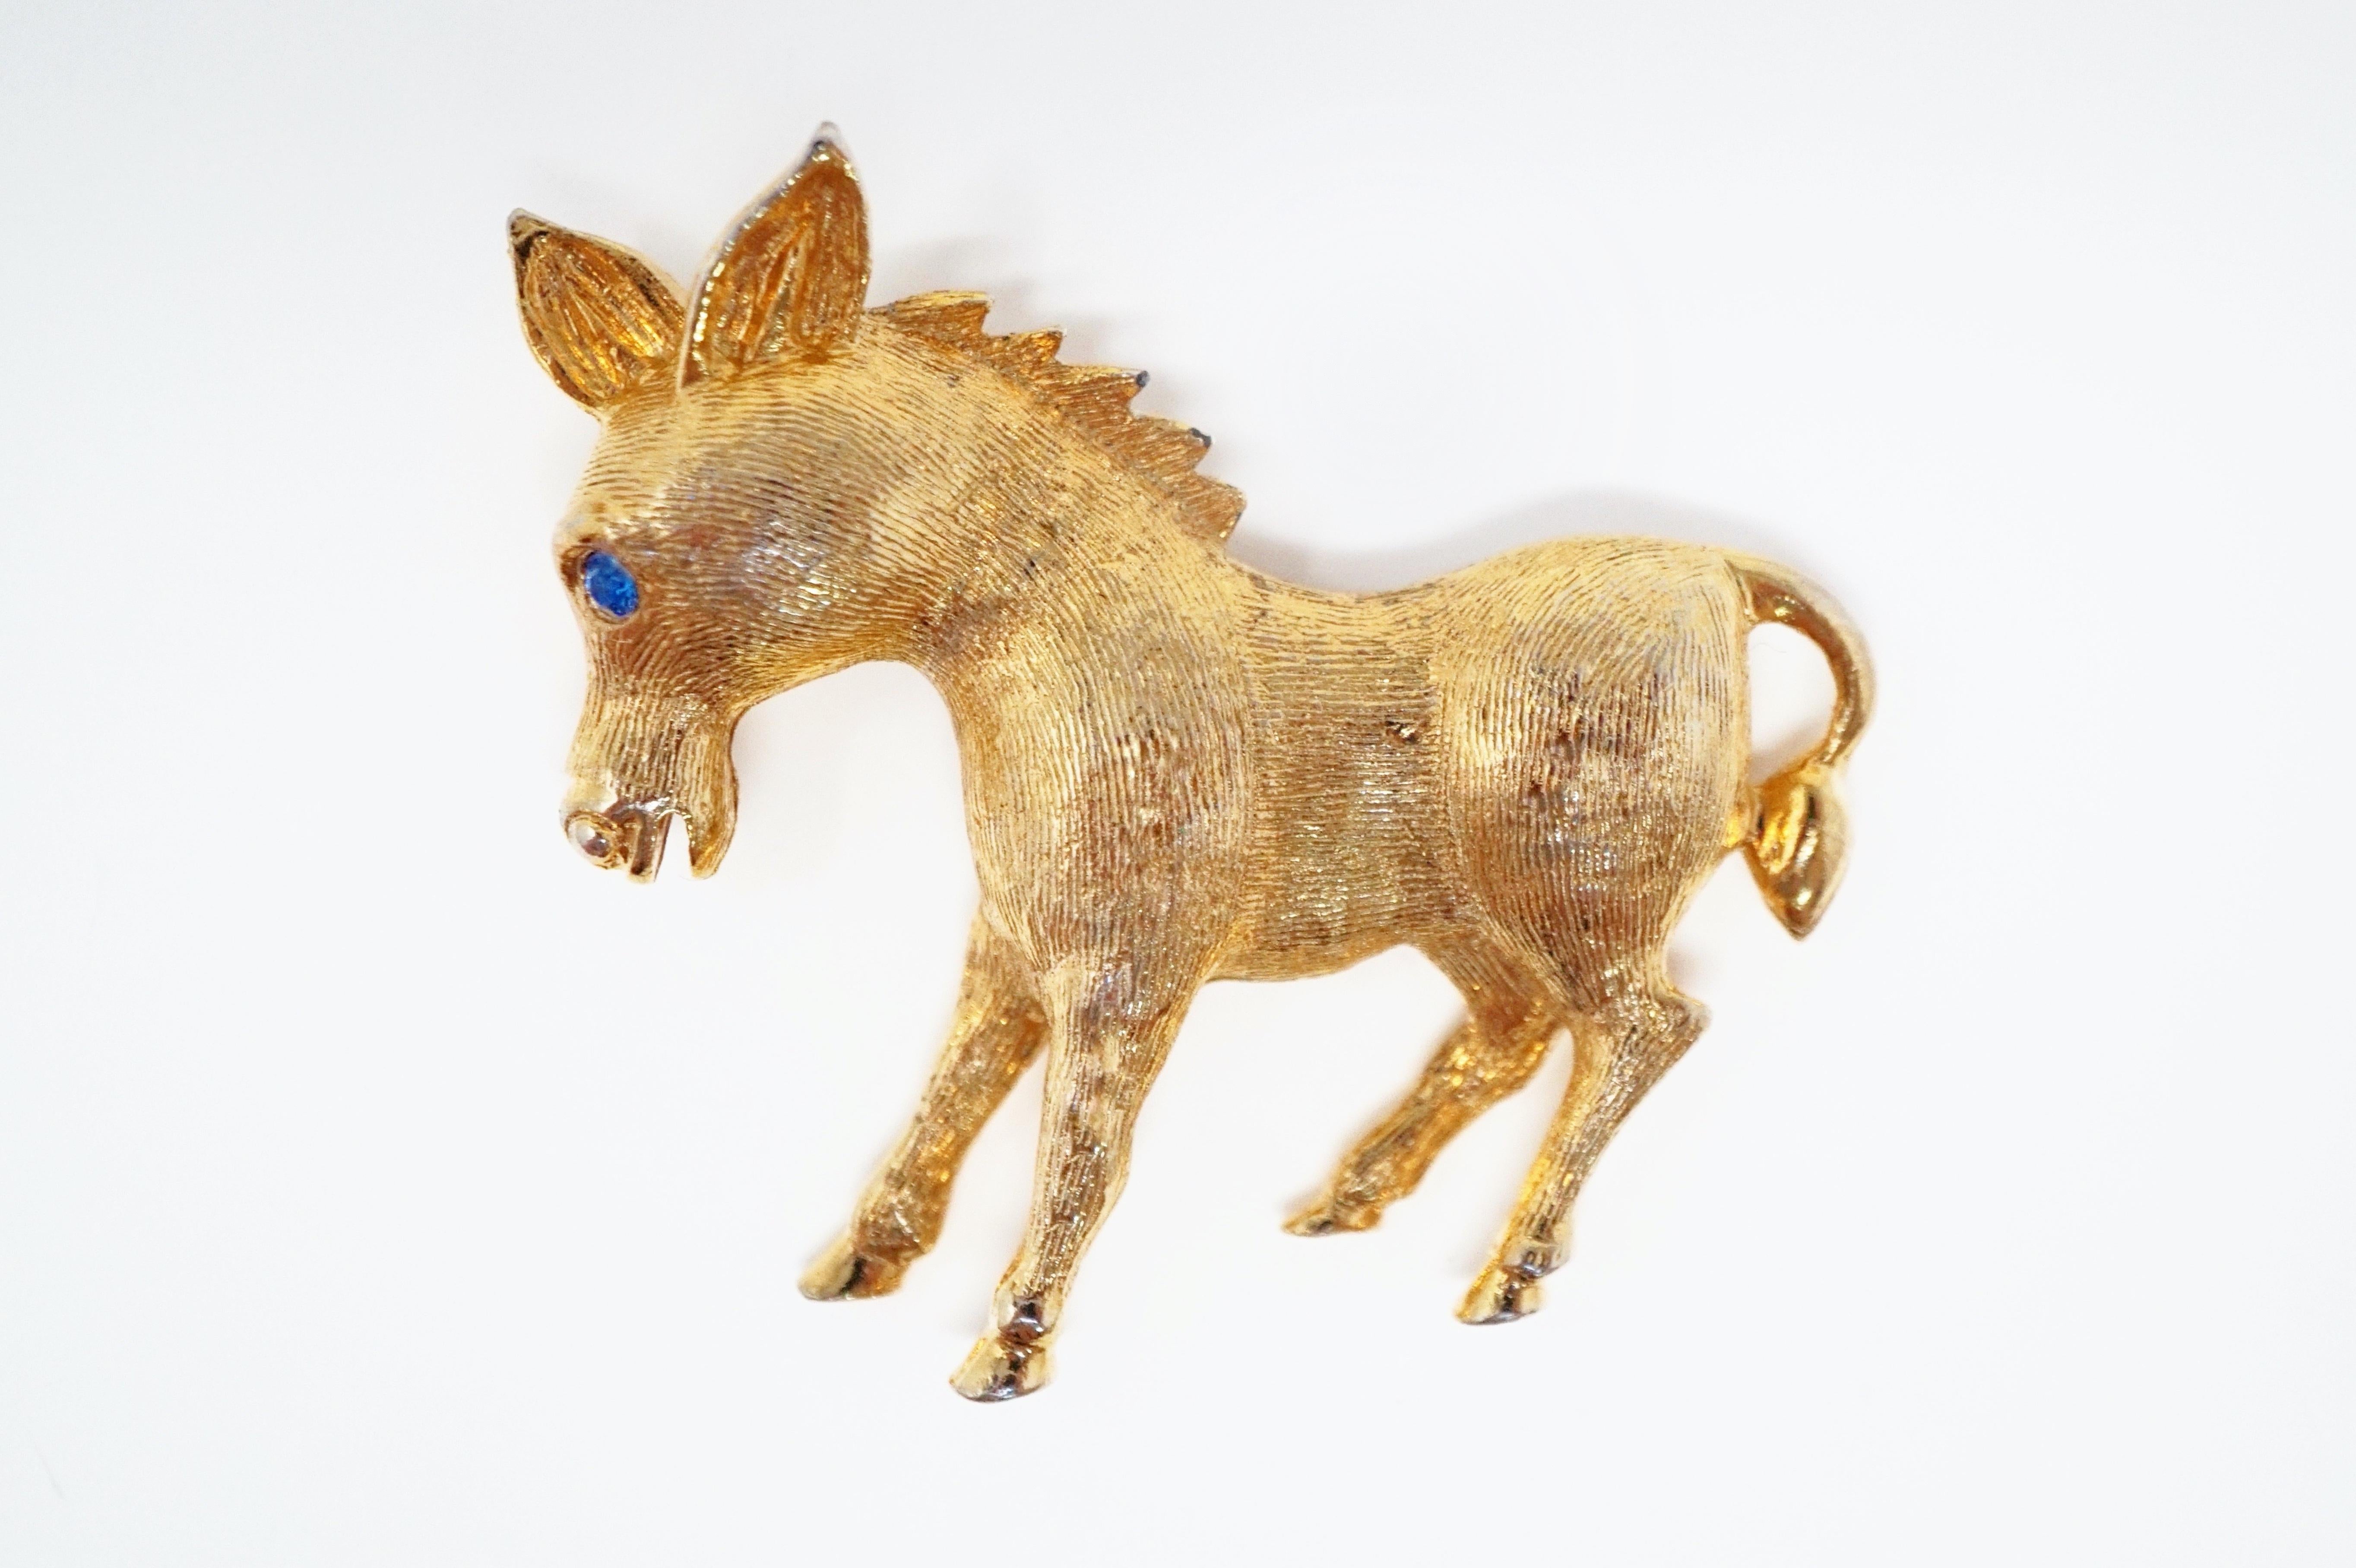 This adorable vintage gold-plated pony brooch from the mid-century era, features a brushed texture and a sweet blue rhinestone eye. Perfect for equestrians or animal lovers in general and a wonderful addition to your vintage jewelry